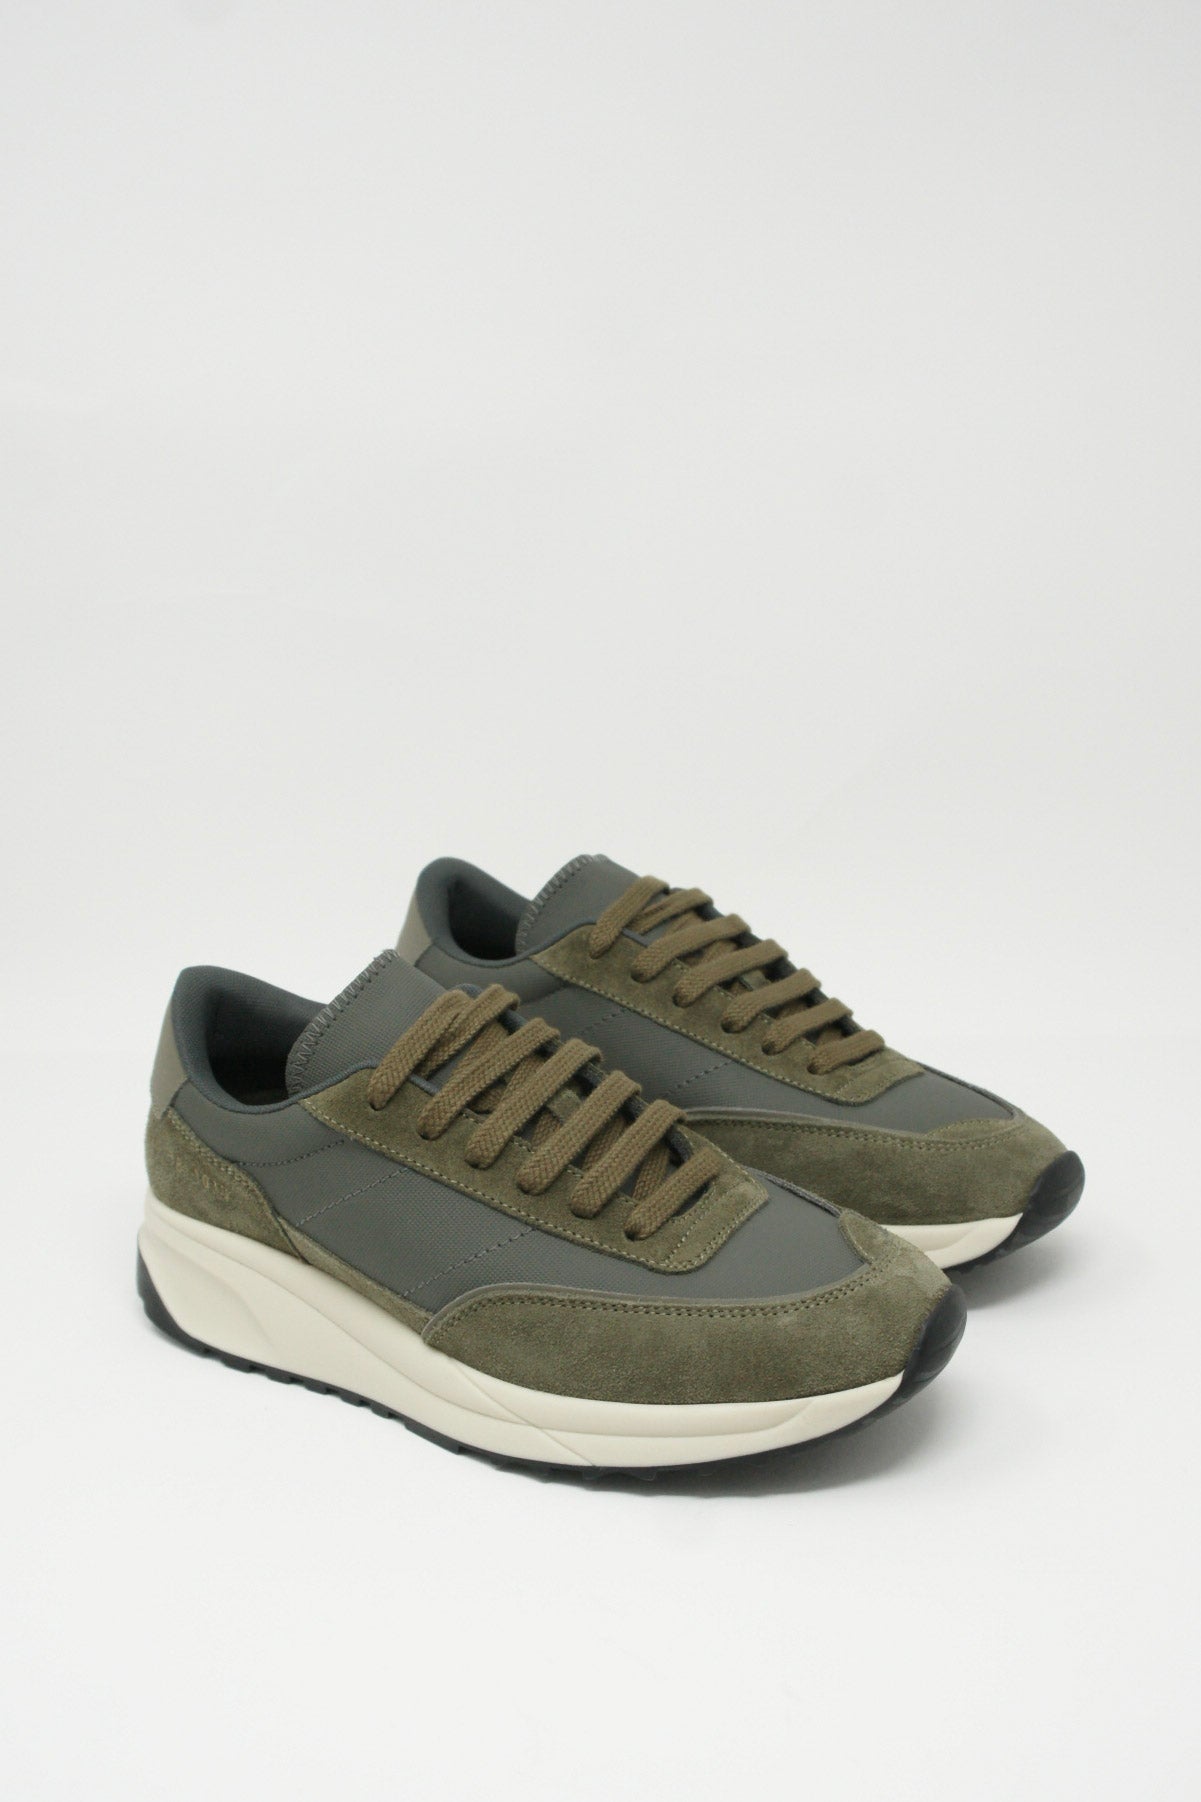 A pair of olive Common Projects Track Technical Article Sneaker 6140 with suede overlays on a white background.